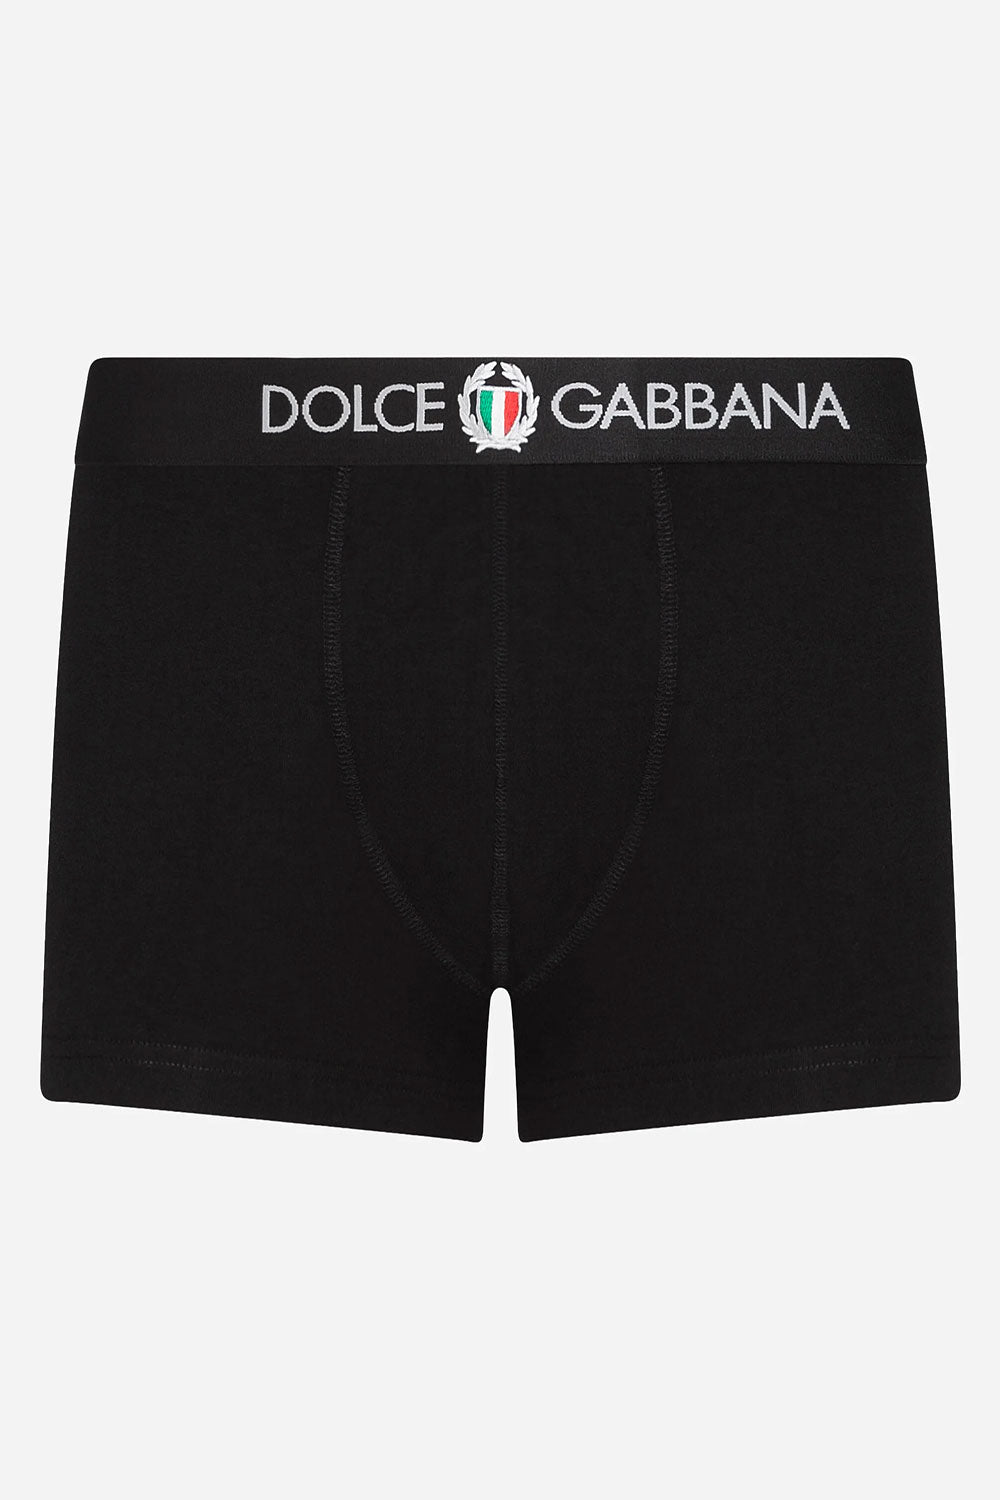 DOLCE & GABBANA LOGO EMBROIDERED BOXERS